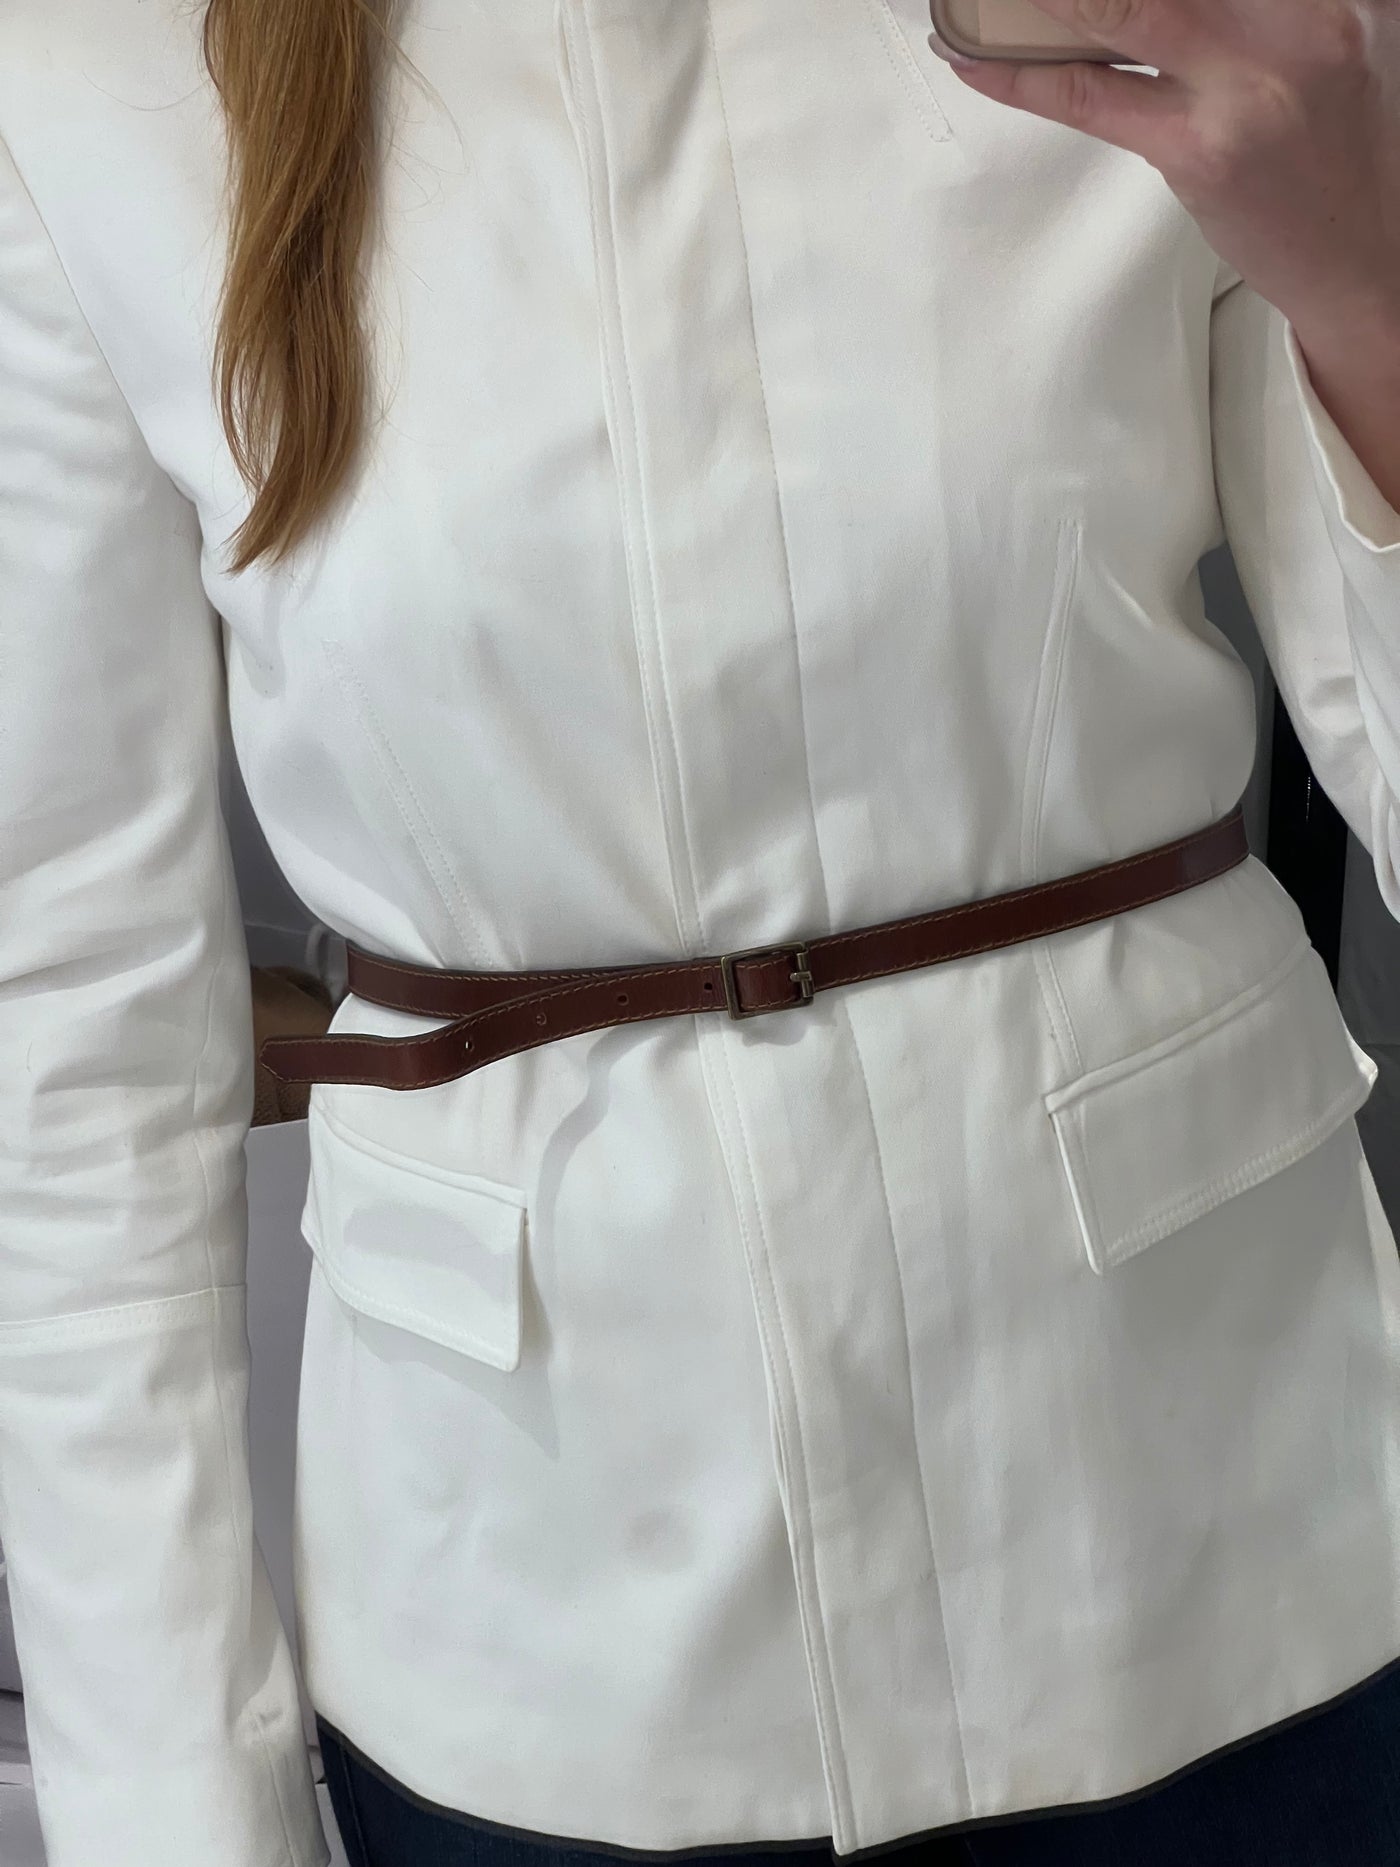 Burberry white tailored jacket with brown leather belt size Uk 10